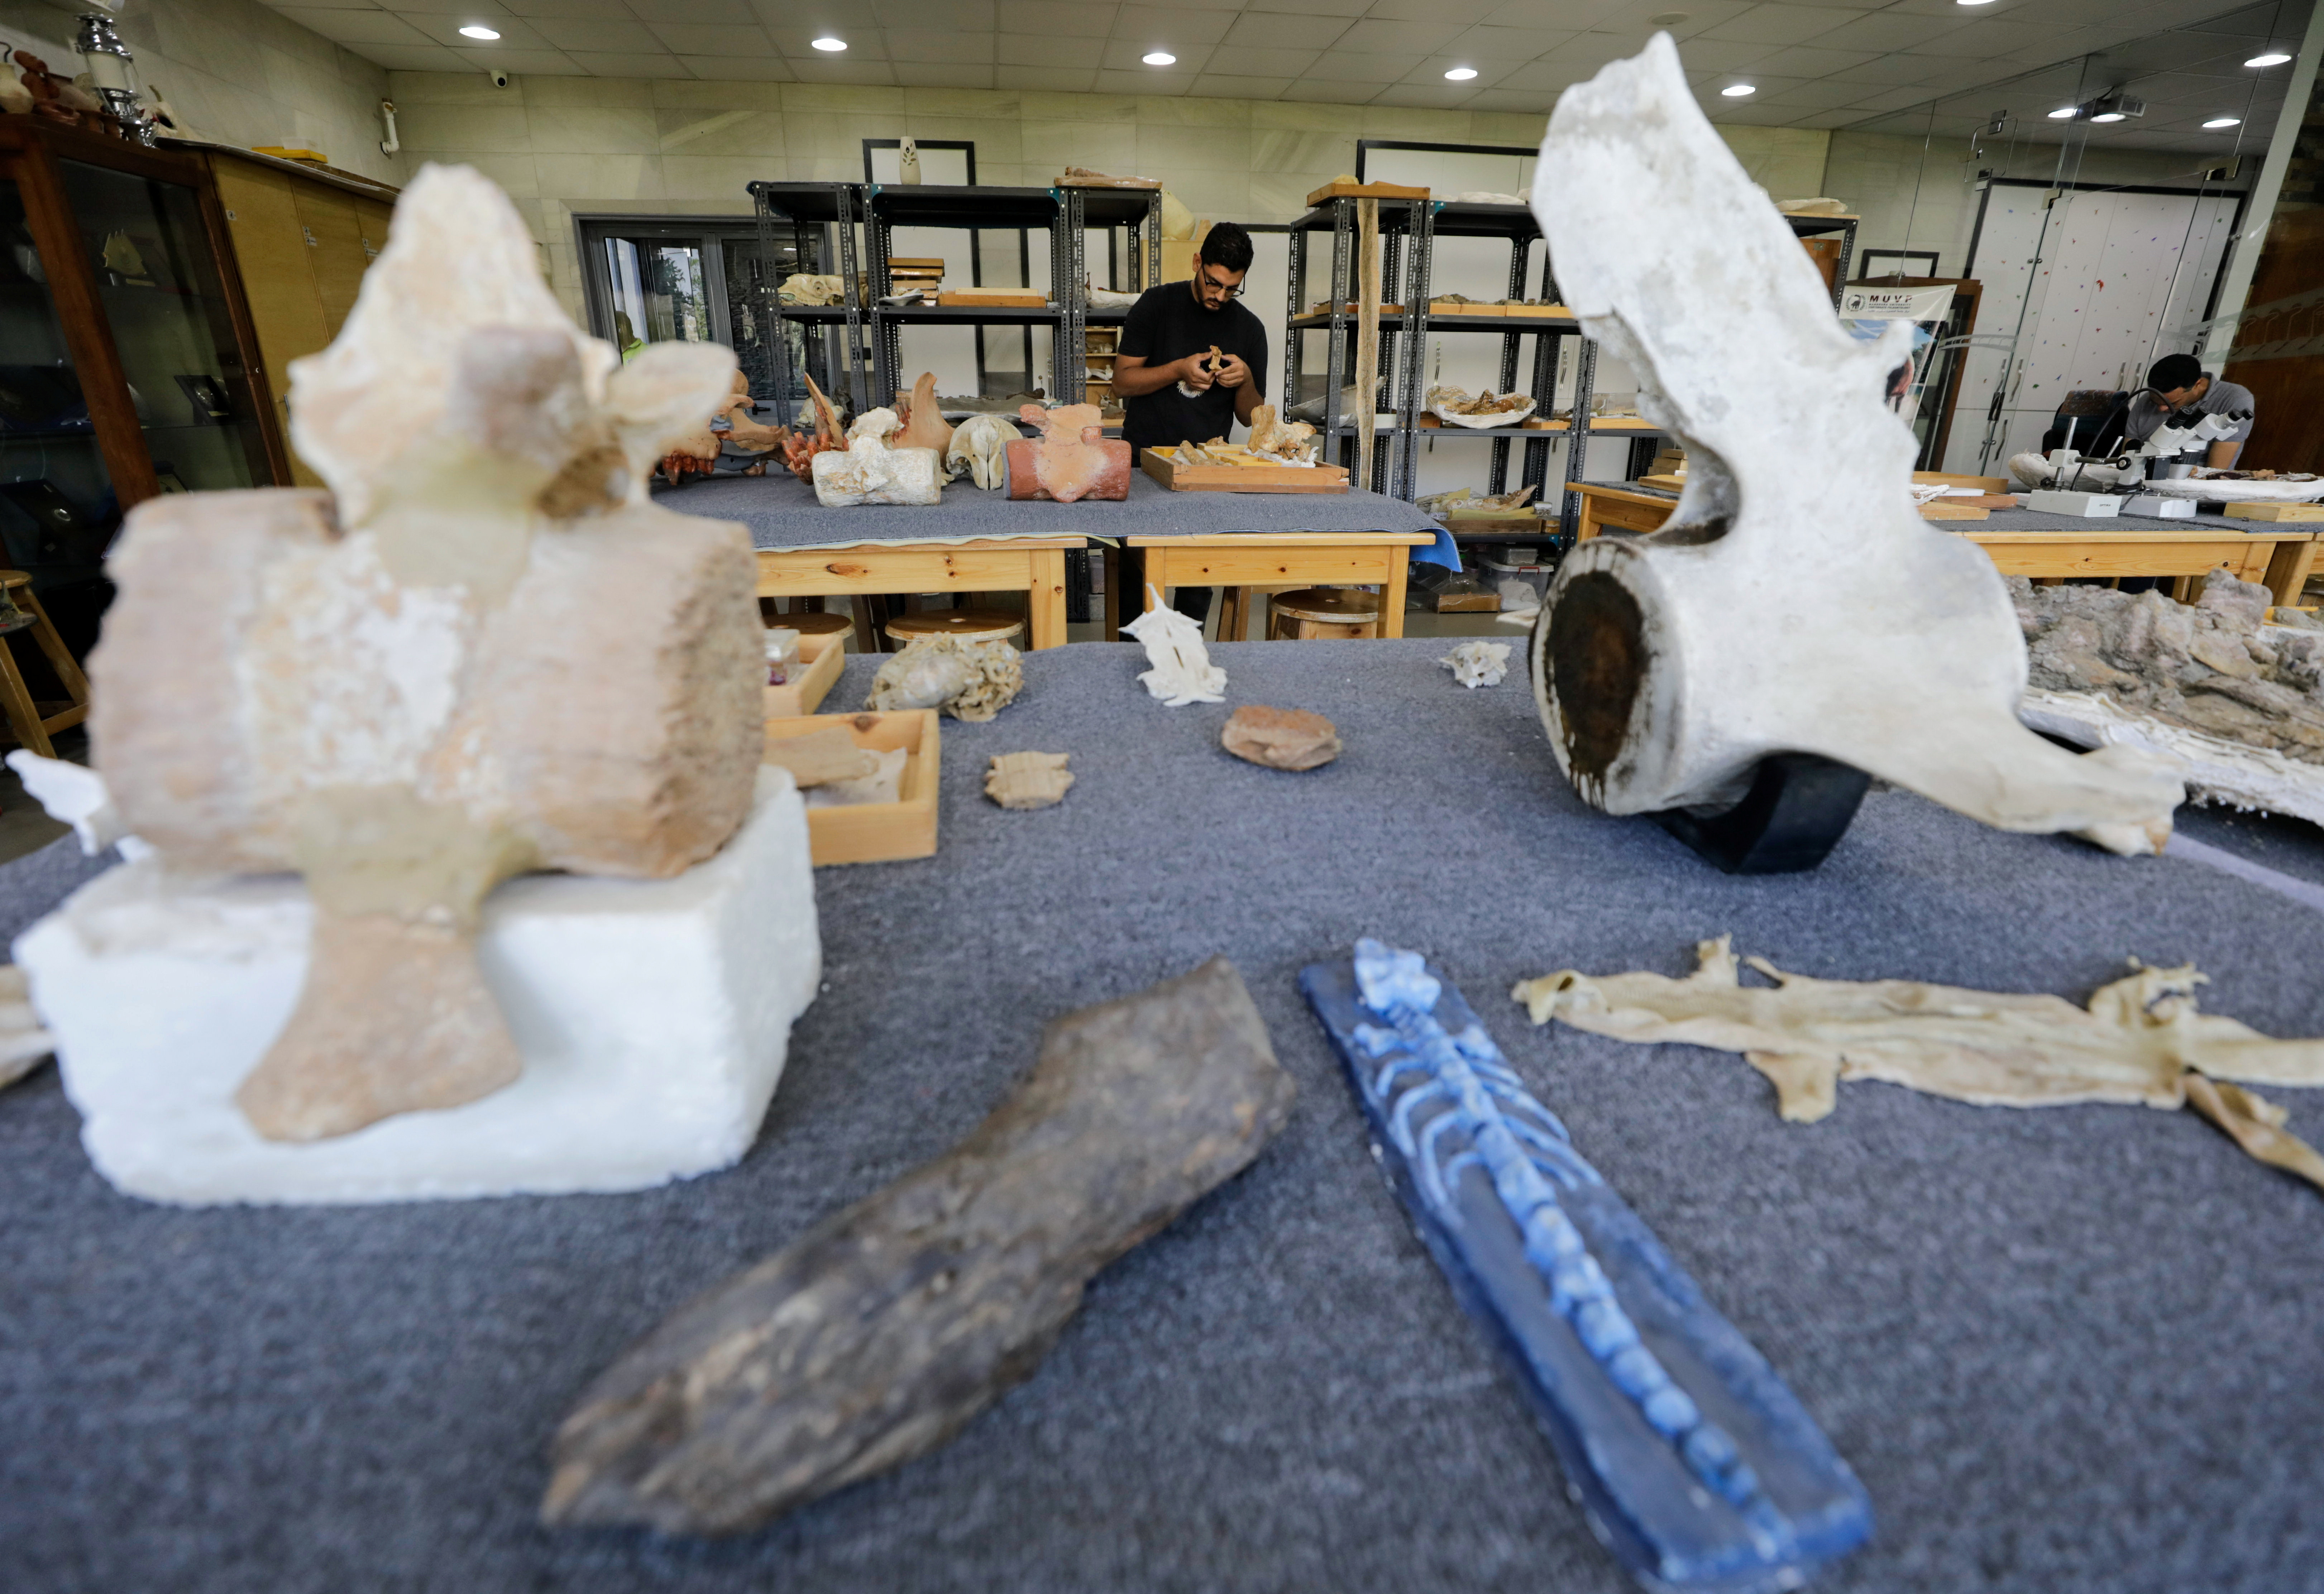 Abdullah Gohar, a researcher at El Mansoura university, works on renovating the 43 million-year-old fossil of a previously unknown amphibious four-legged whale species called "Phiomicetus anubis" that helps trace the transition of whales from land to sea, discovered in the Fayum Depression in the Western Desert, near the town of El Mansoura, north of Cairo, Egypt, August 26, 2021. REUTERS/Mohamed Abd El Ghany - RC22DP91EX4R